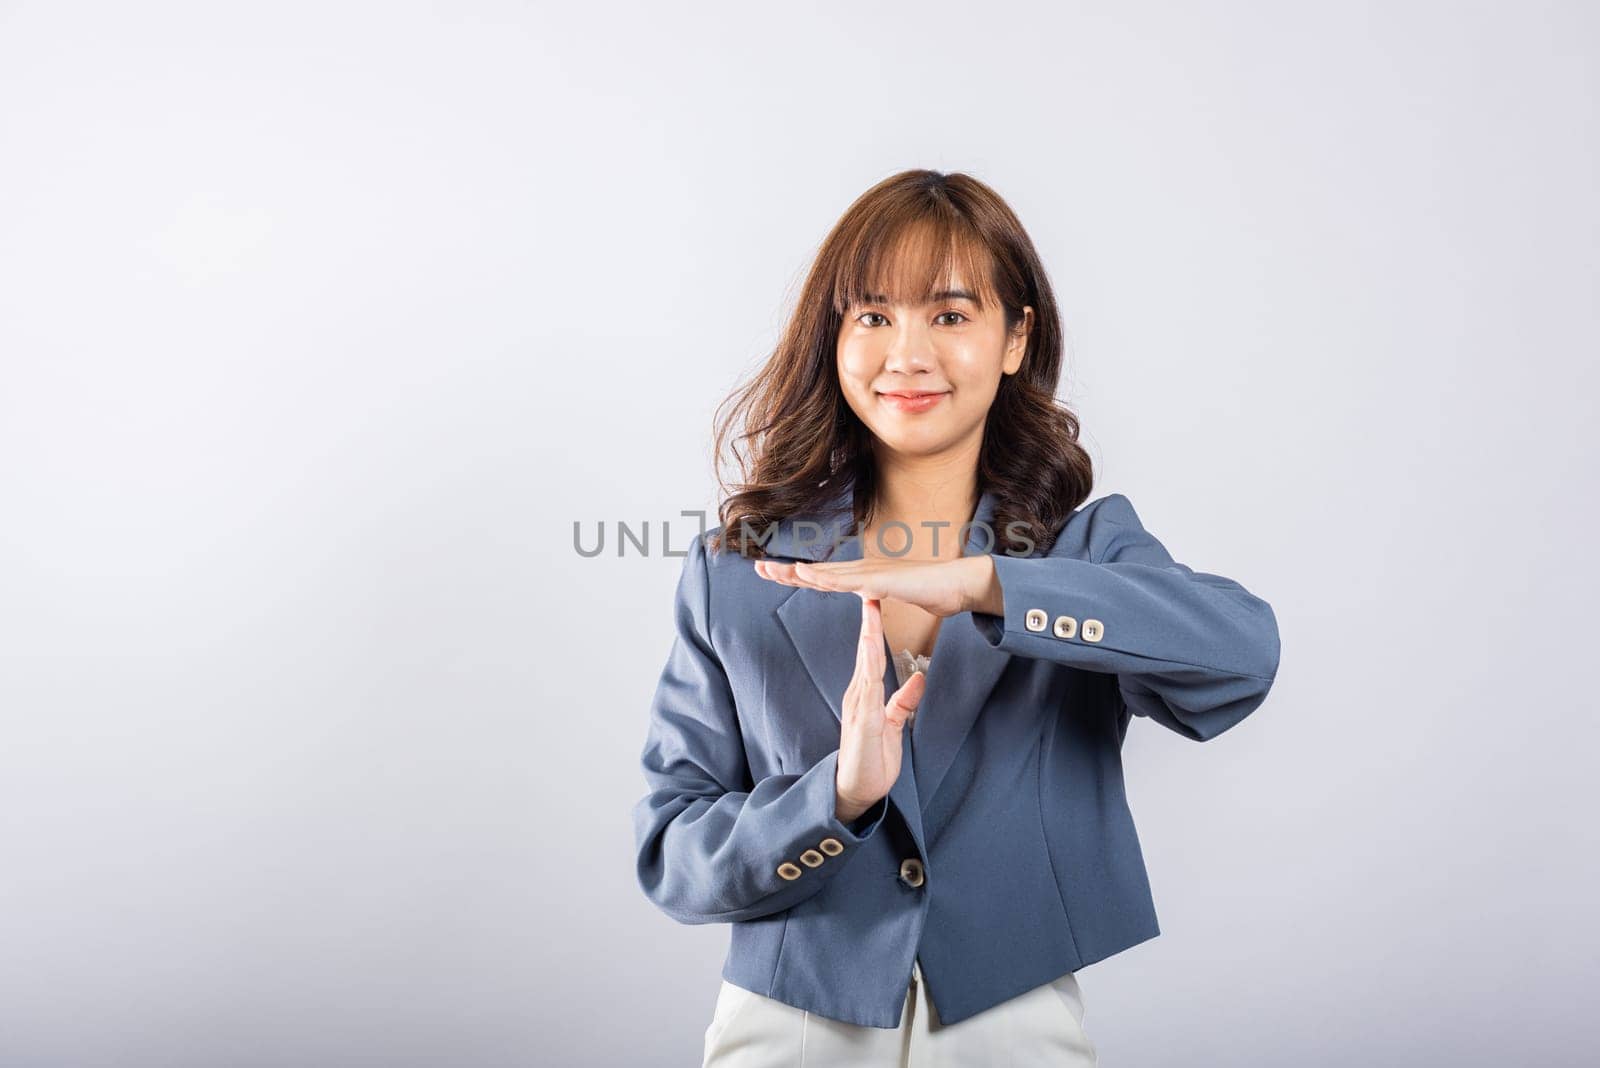 Closeup portrait young business woman wearing a suit smiling making time out gesture with hands studio shot isolated on white background, demonstrates break hand sign, stop time by Sorapop